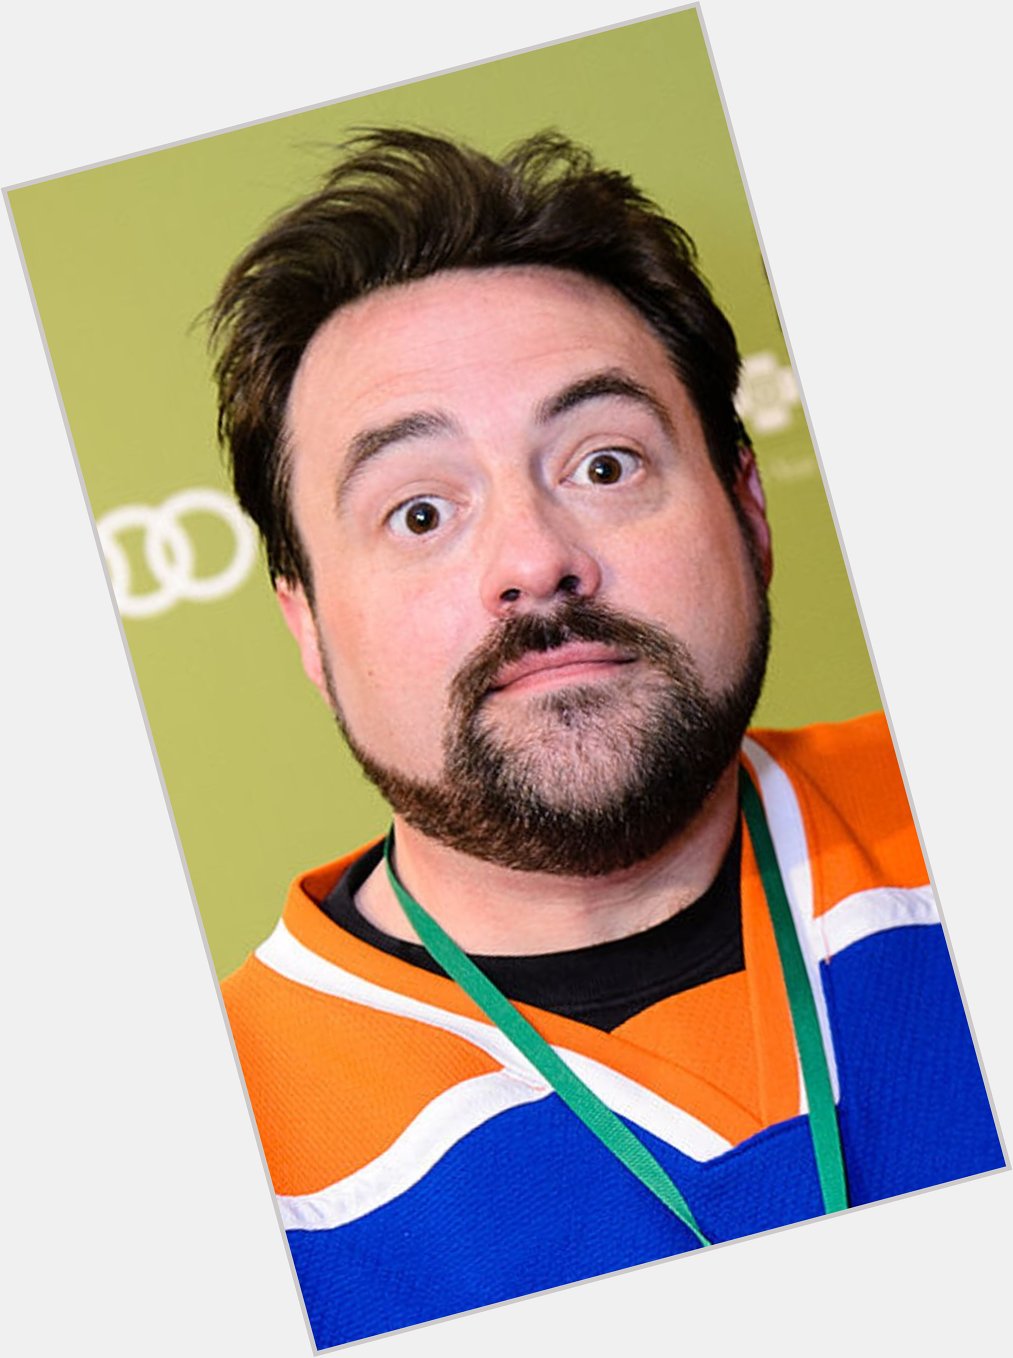 Happy Birthday Kevin Smith -  Gen X filmmaker, actor, comedian, comic book writer, author, and podcaster 